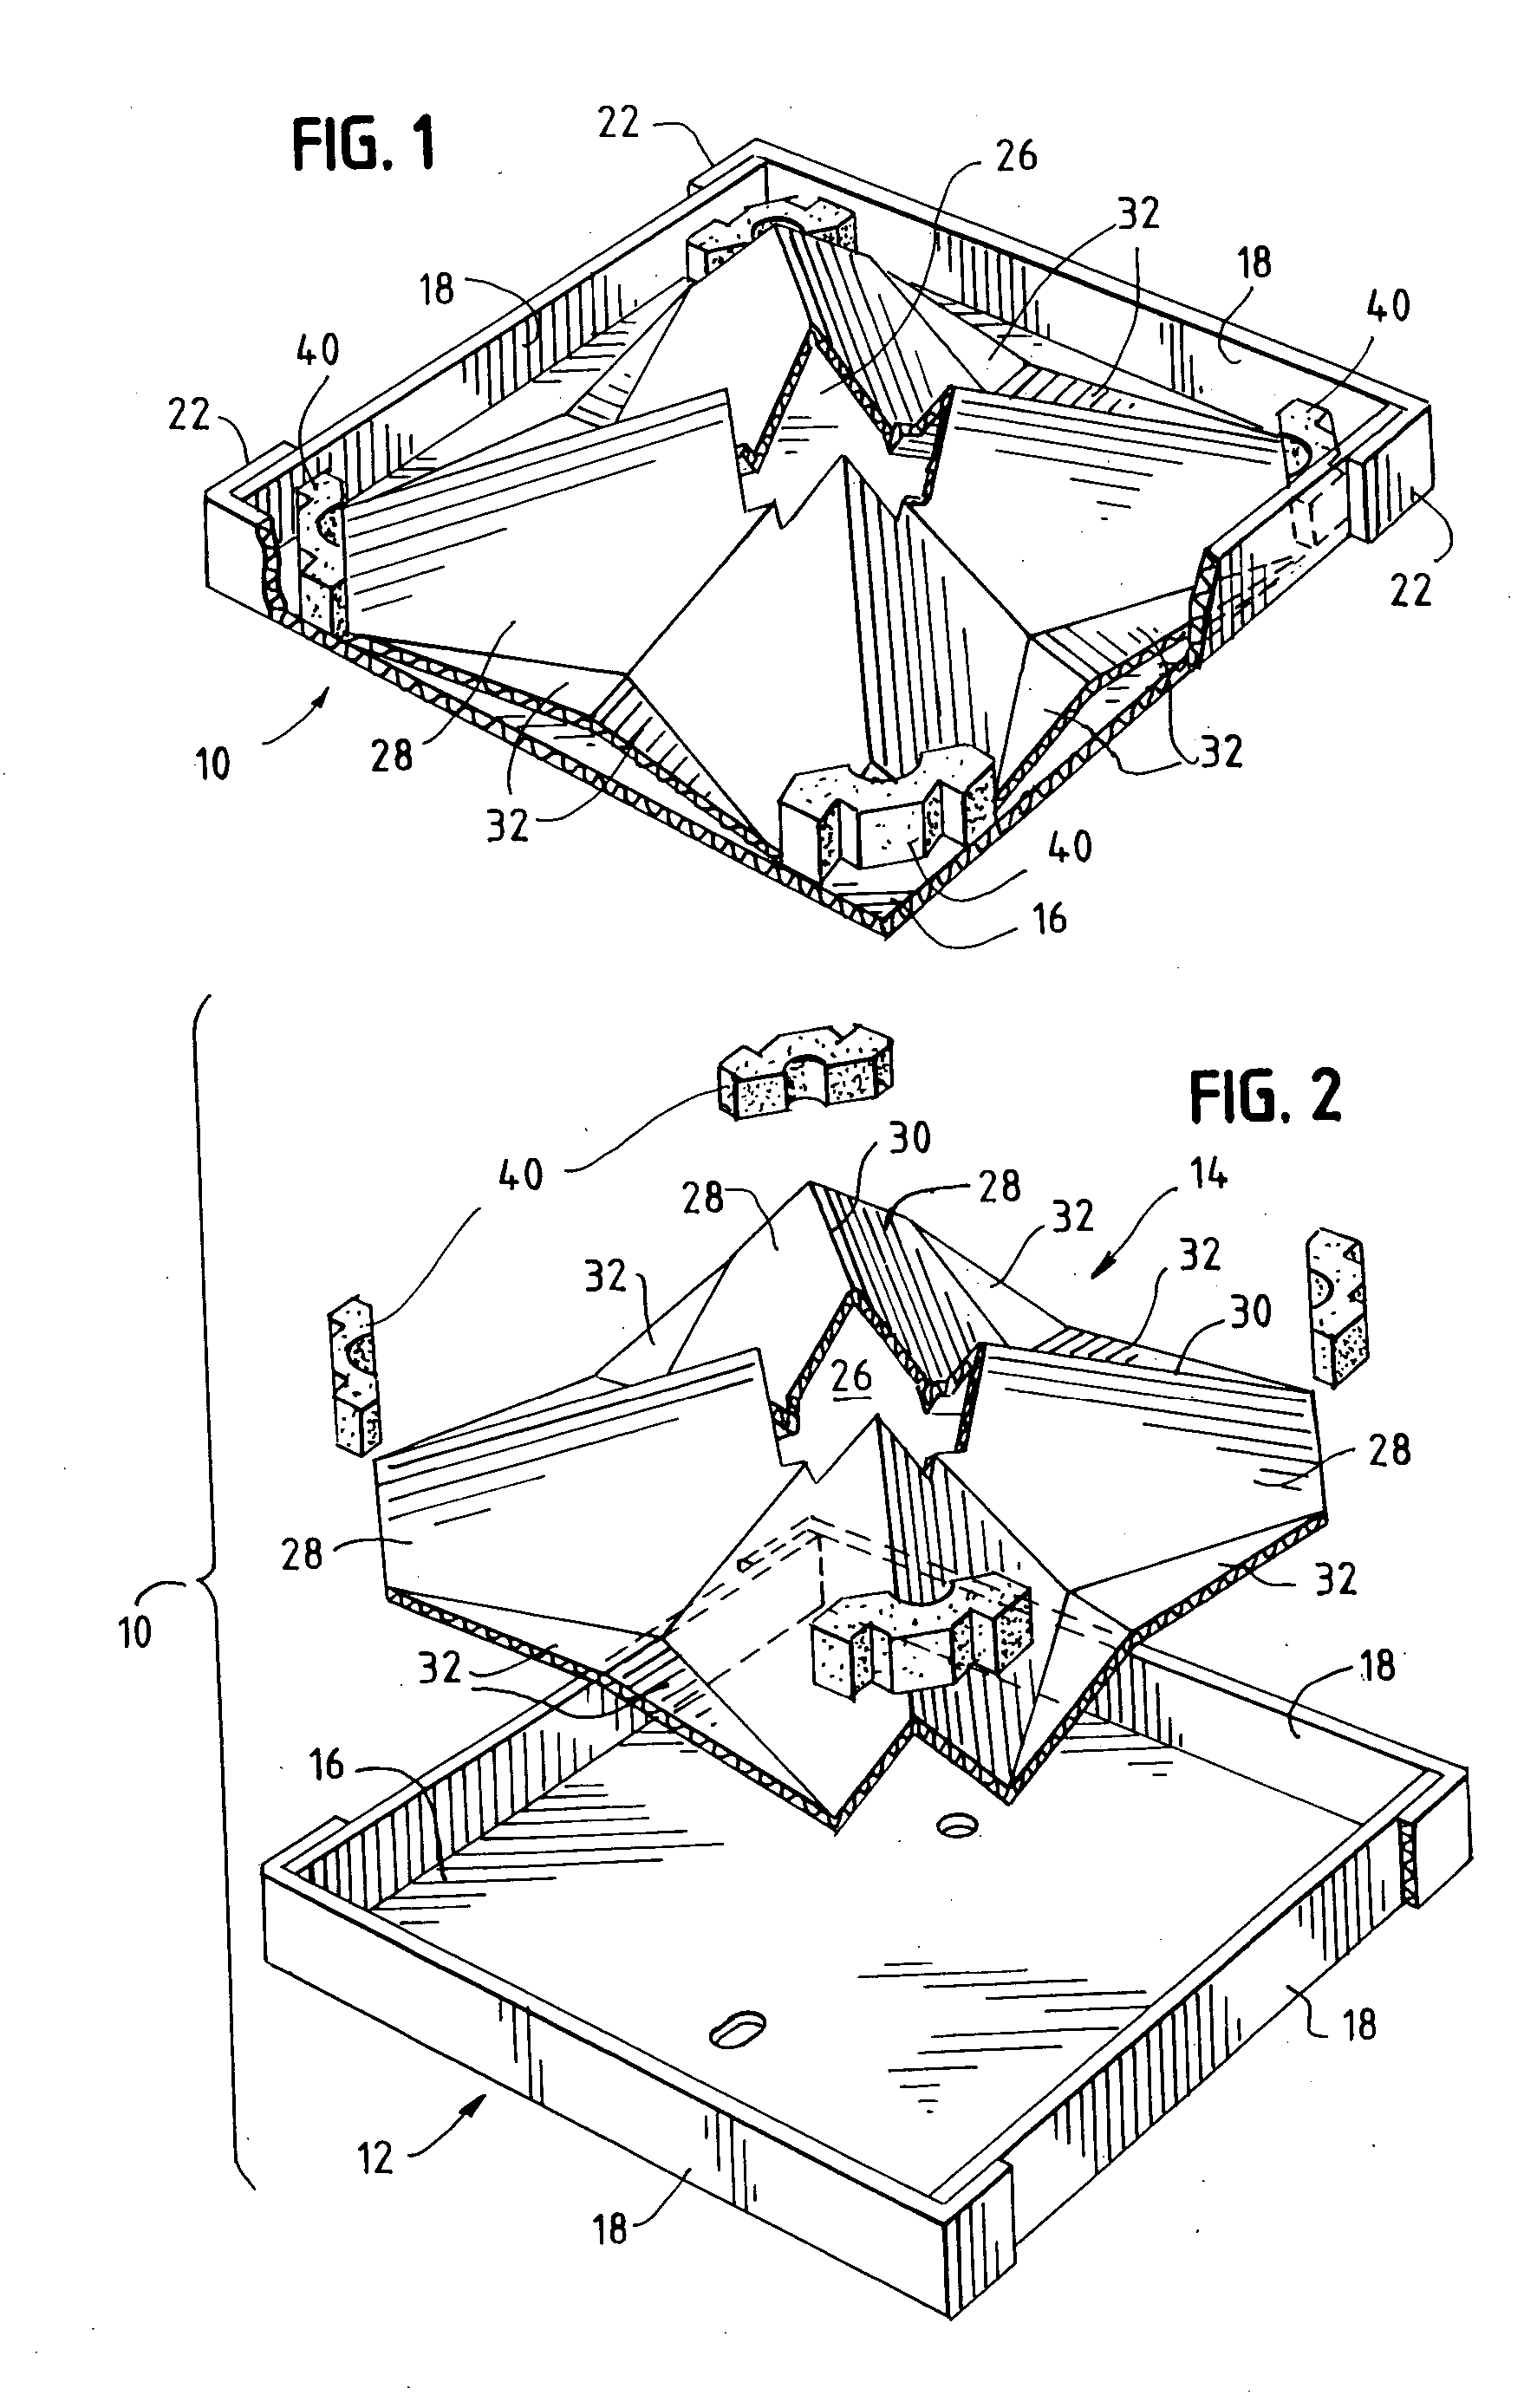 Washing machine base for securing a central mechanism